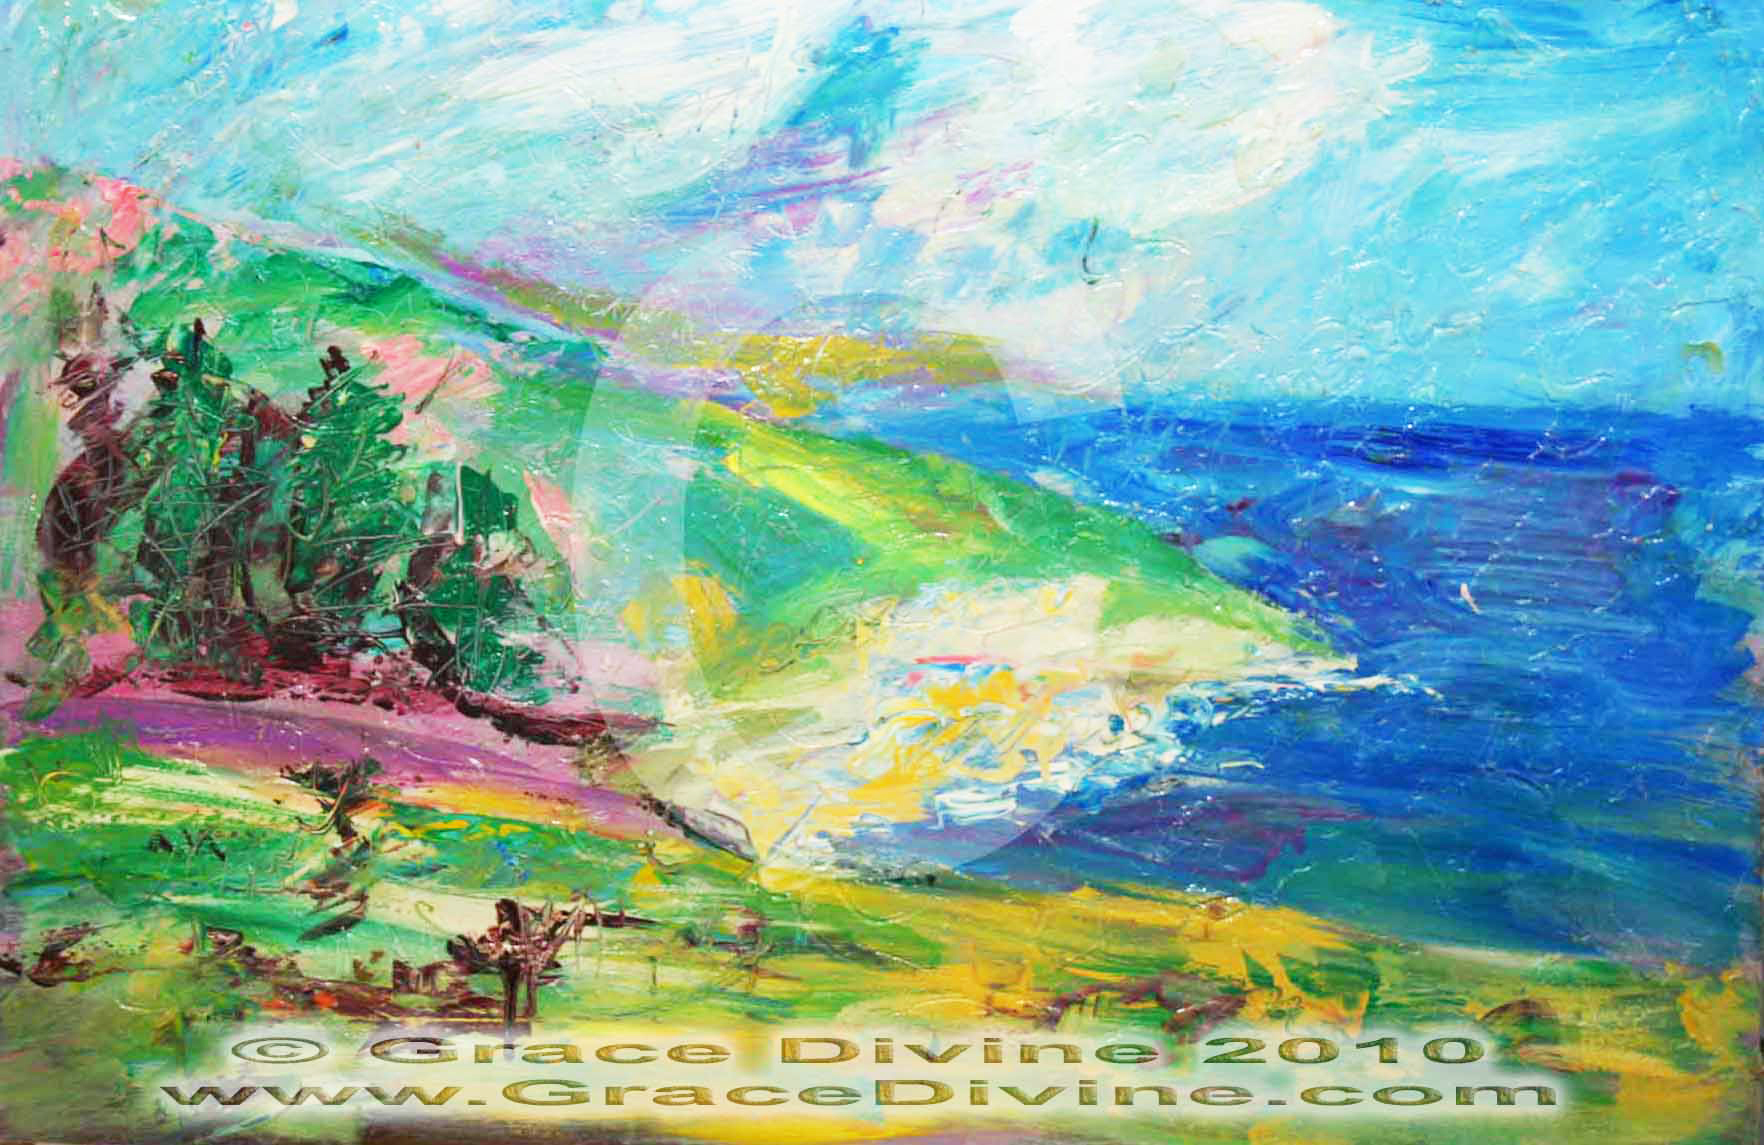 -seascape-art-beach-boat-sand-surf-painting-grace-divine-modern-abstract-surreal